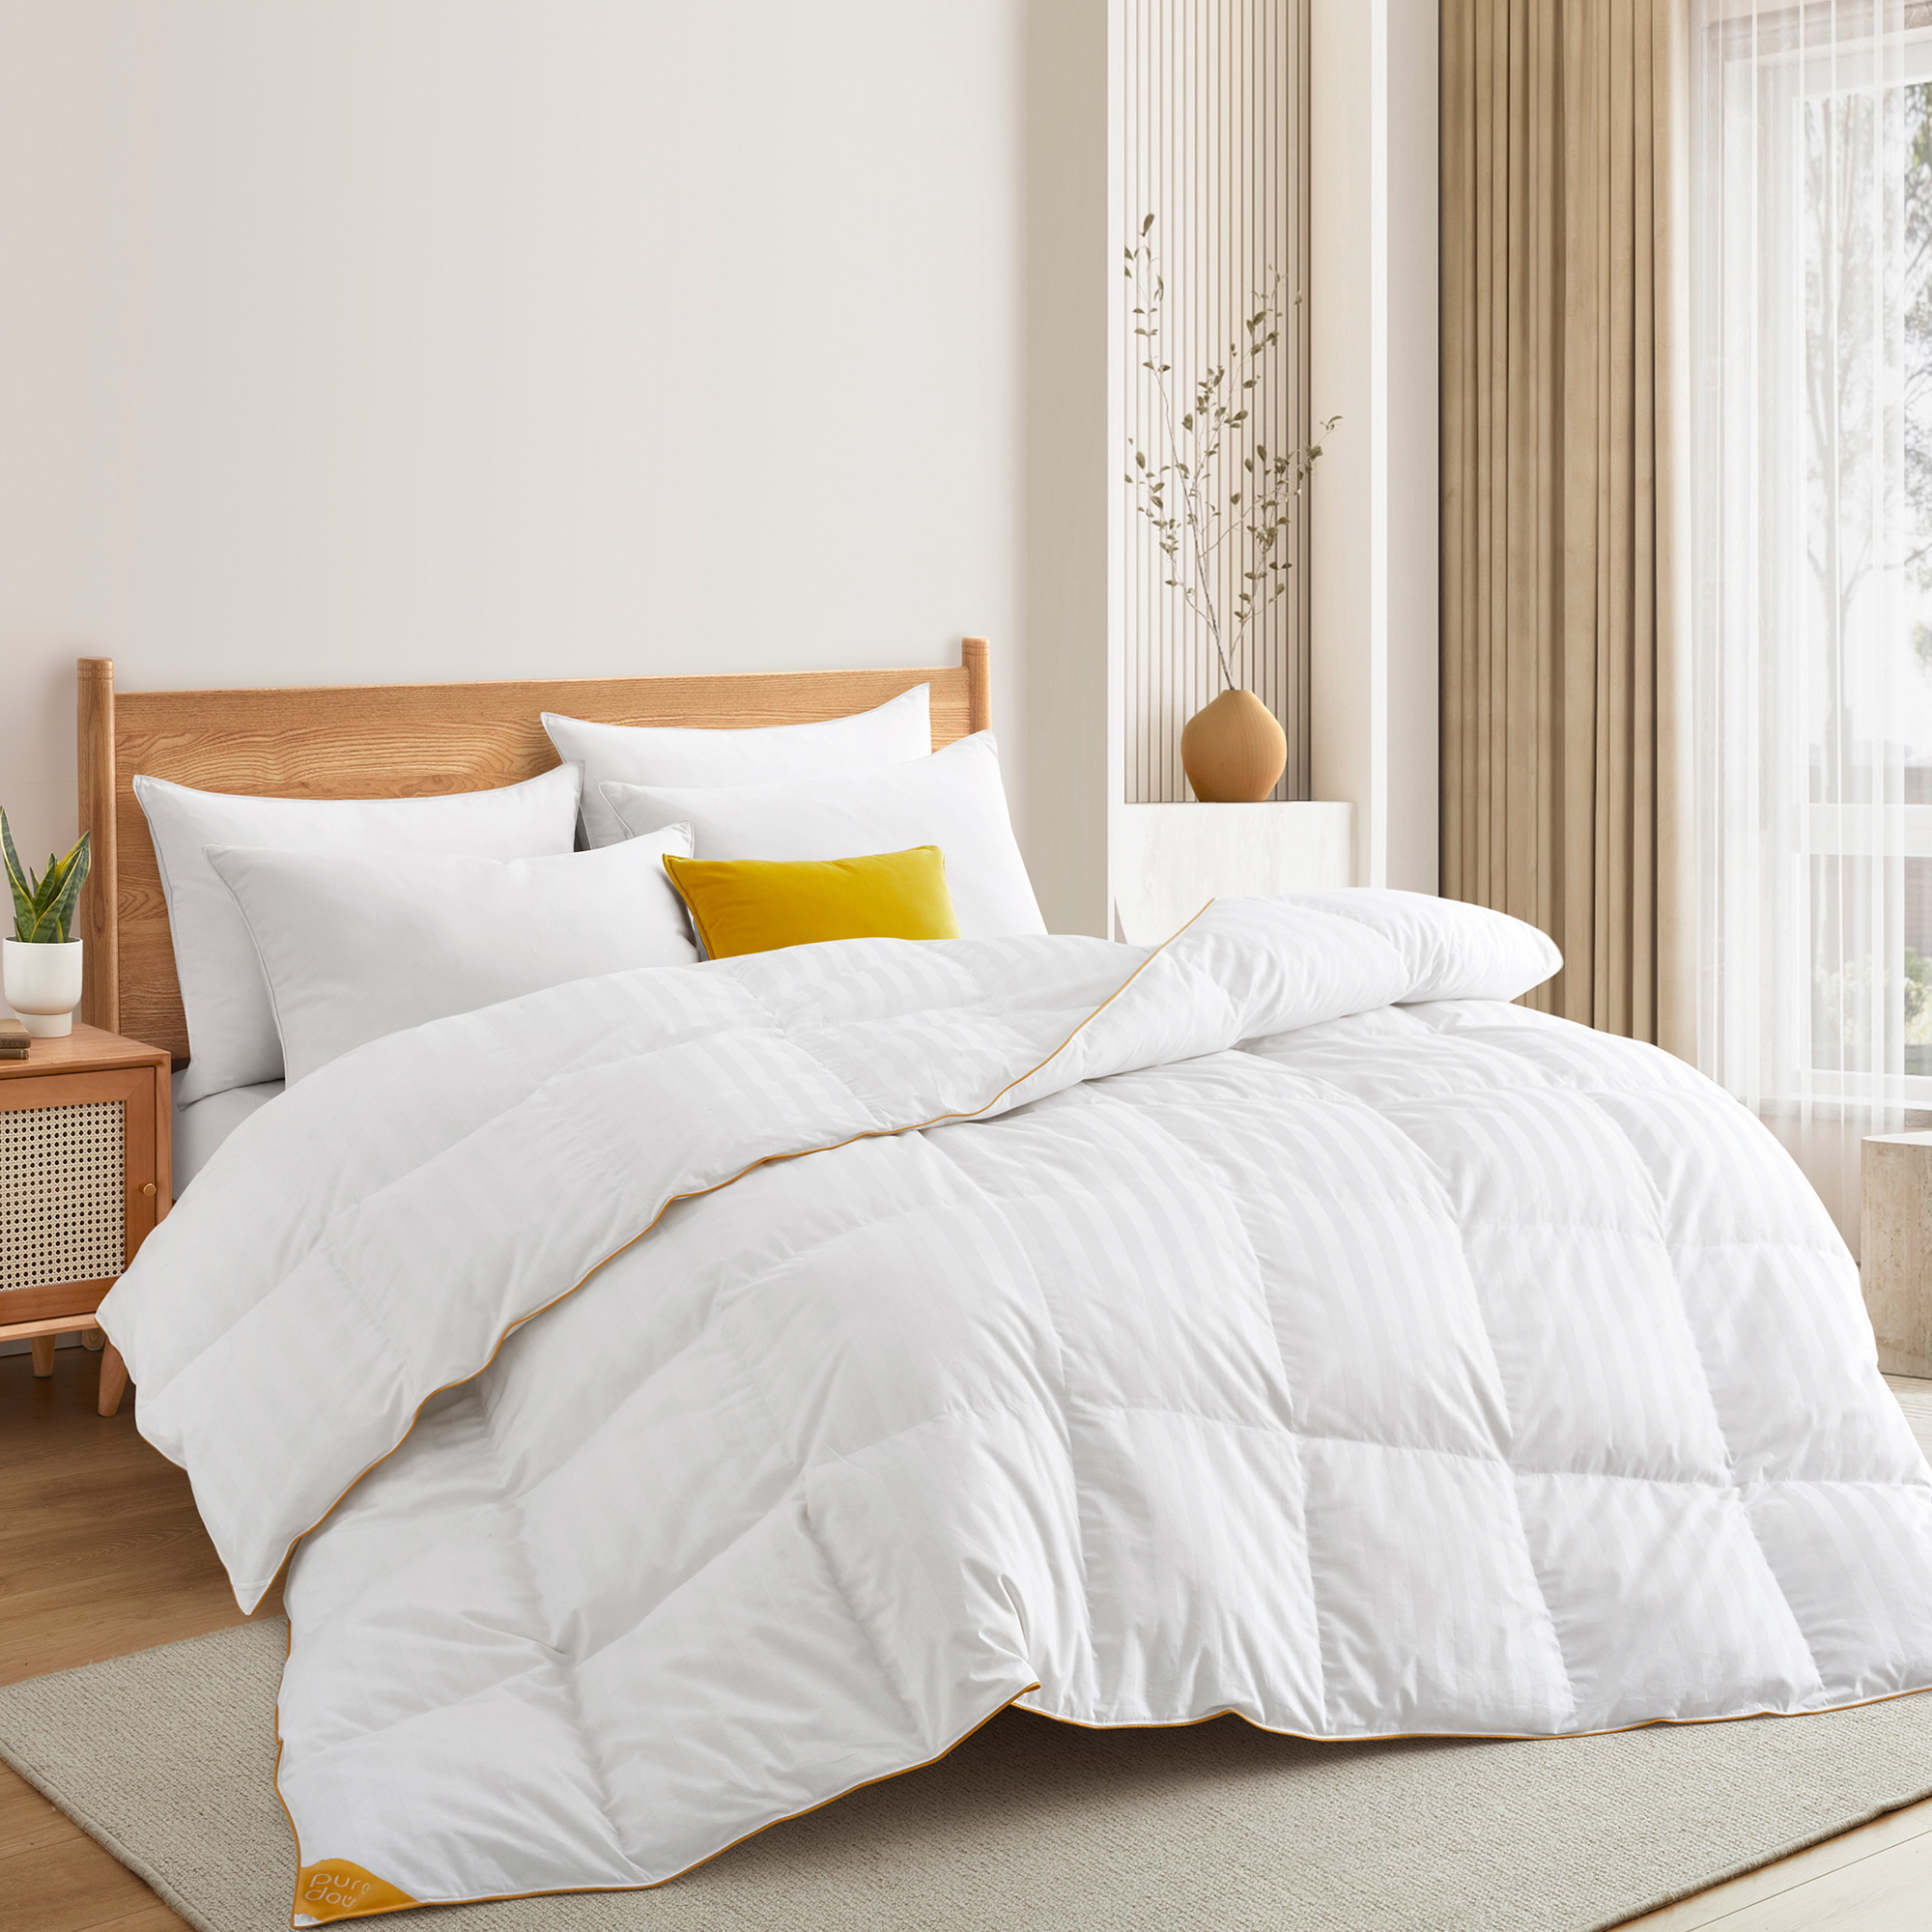 500 TC White Goose Down Feather All Season Comforter Breathable Cotton Cover, Baffled Box Duvet Insert - Twin-68*90